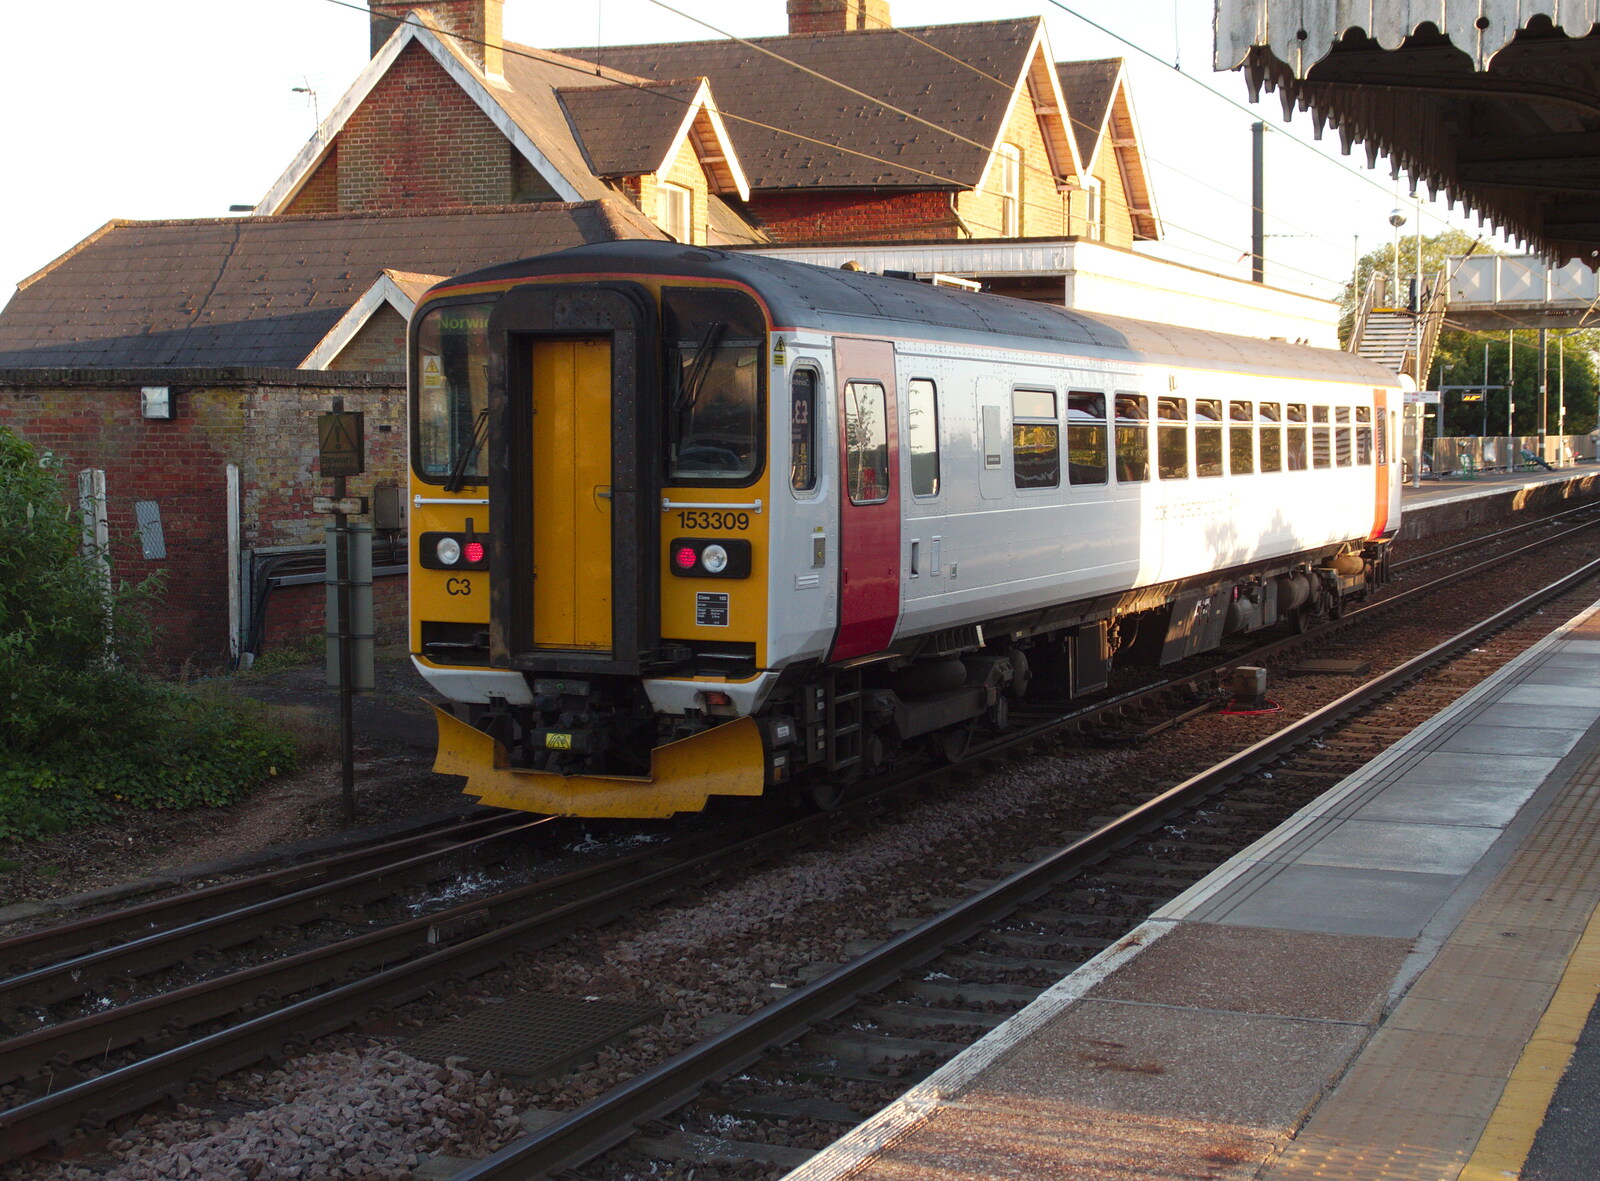 A single Class 153 unit rumbles through Diss from Railway Hell: A Pantograph Story, Chelmsford, Essex - 17th June 2014